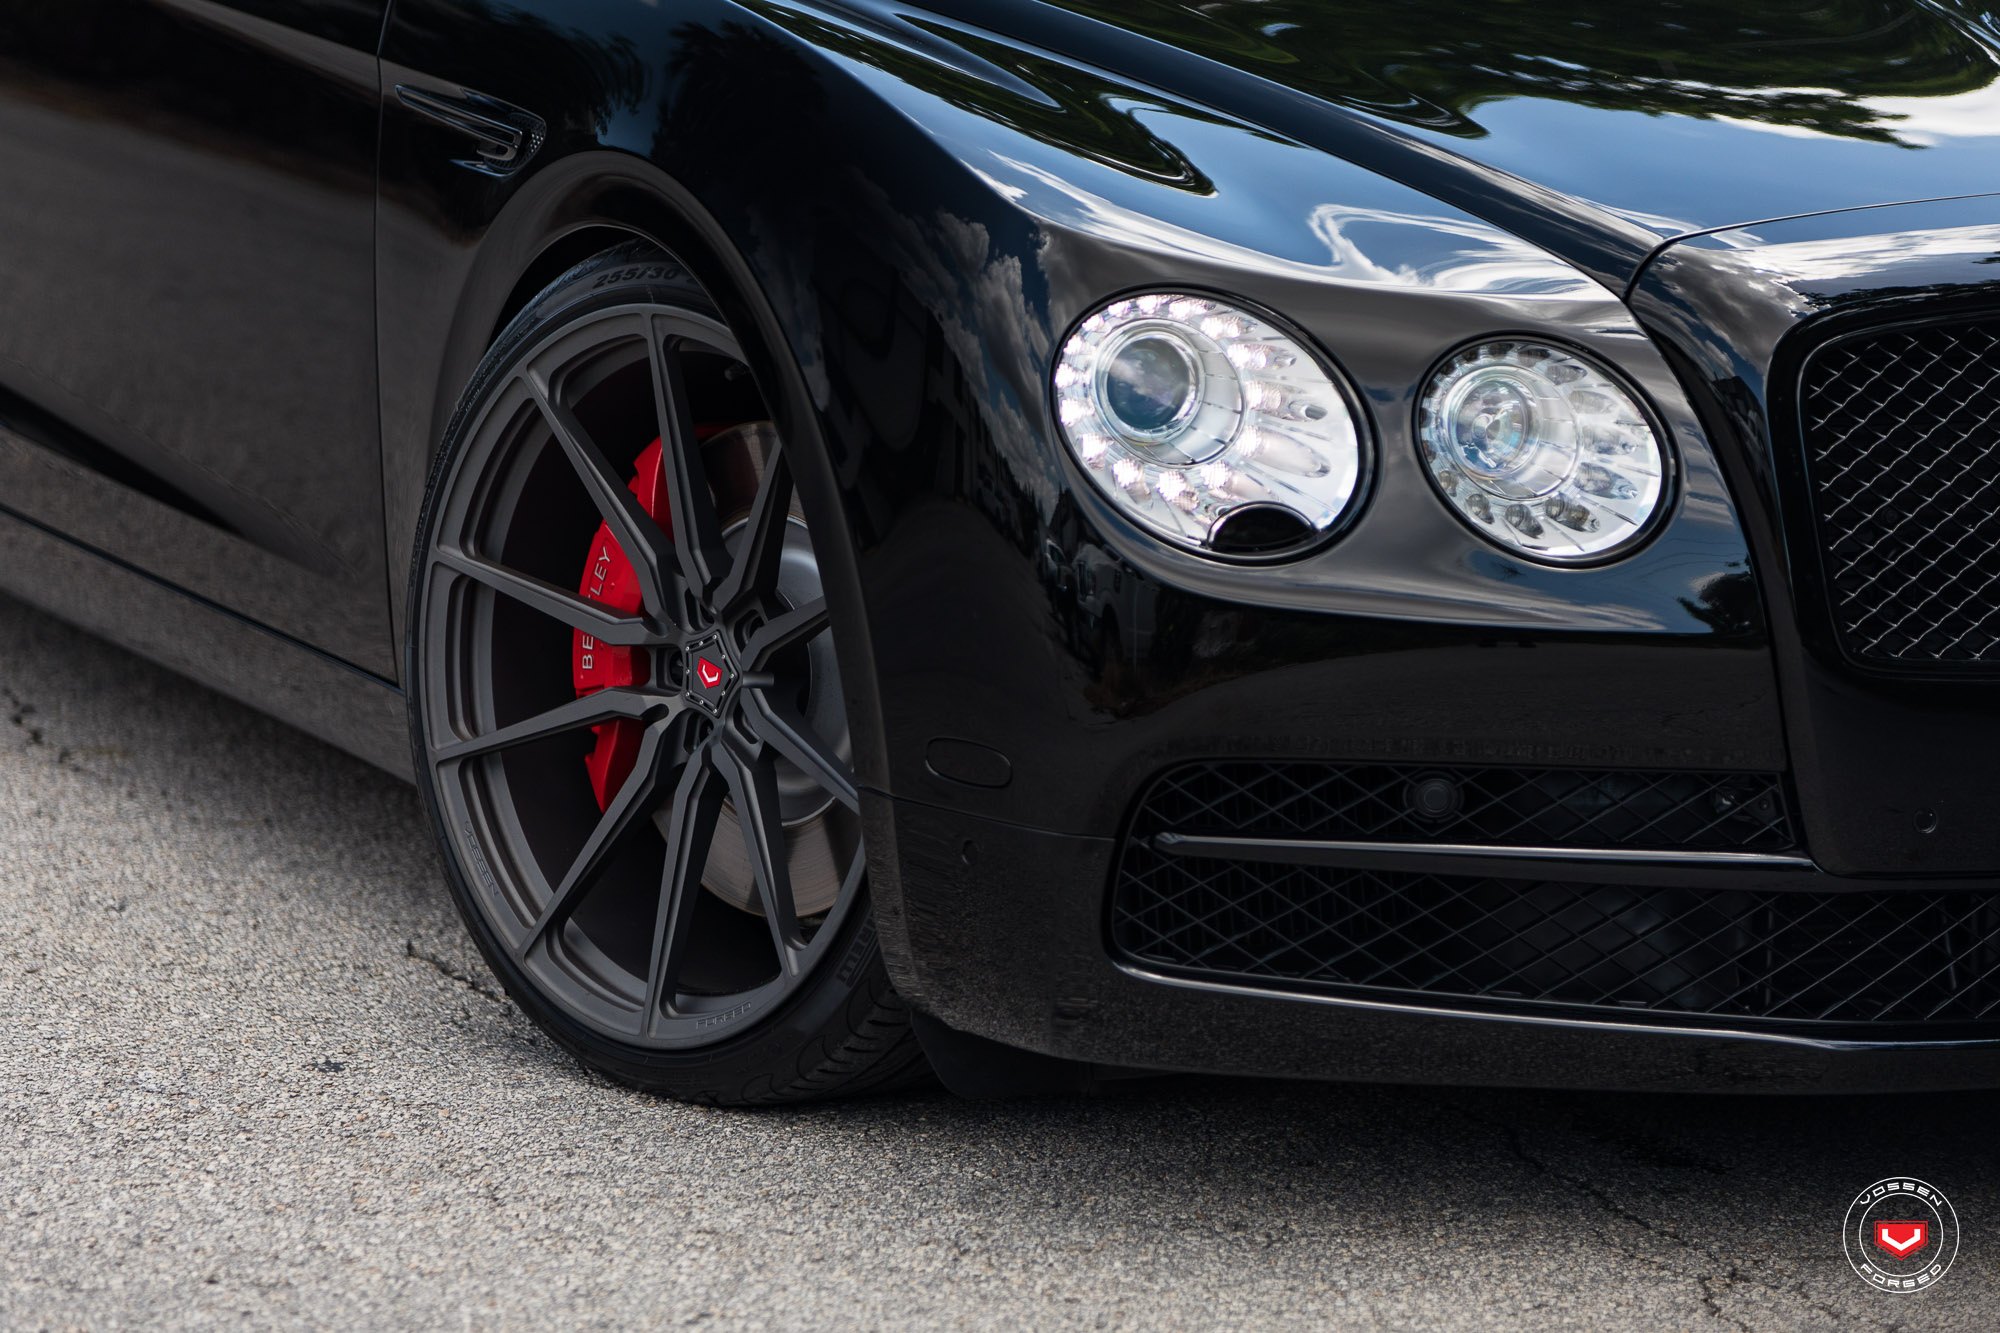 Crystal Clear LED Headlights on Black Bentley Flying-Spur - Photo by Vossen